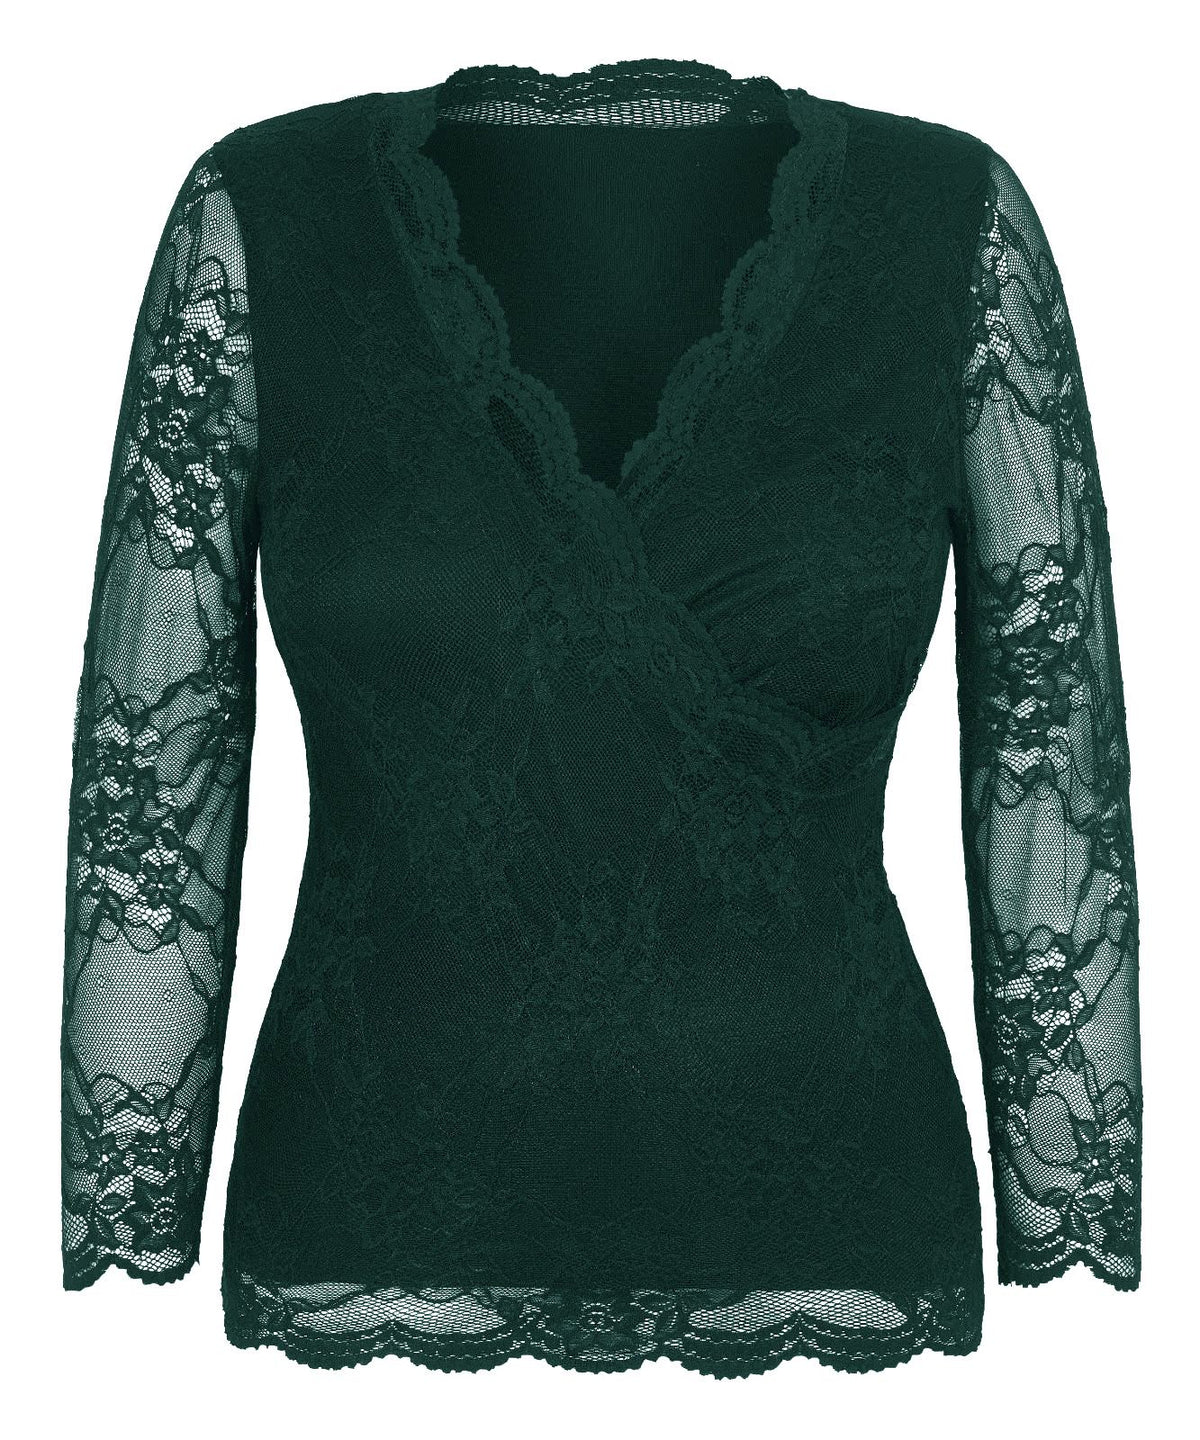 green lace top